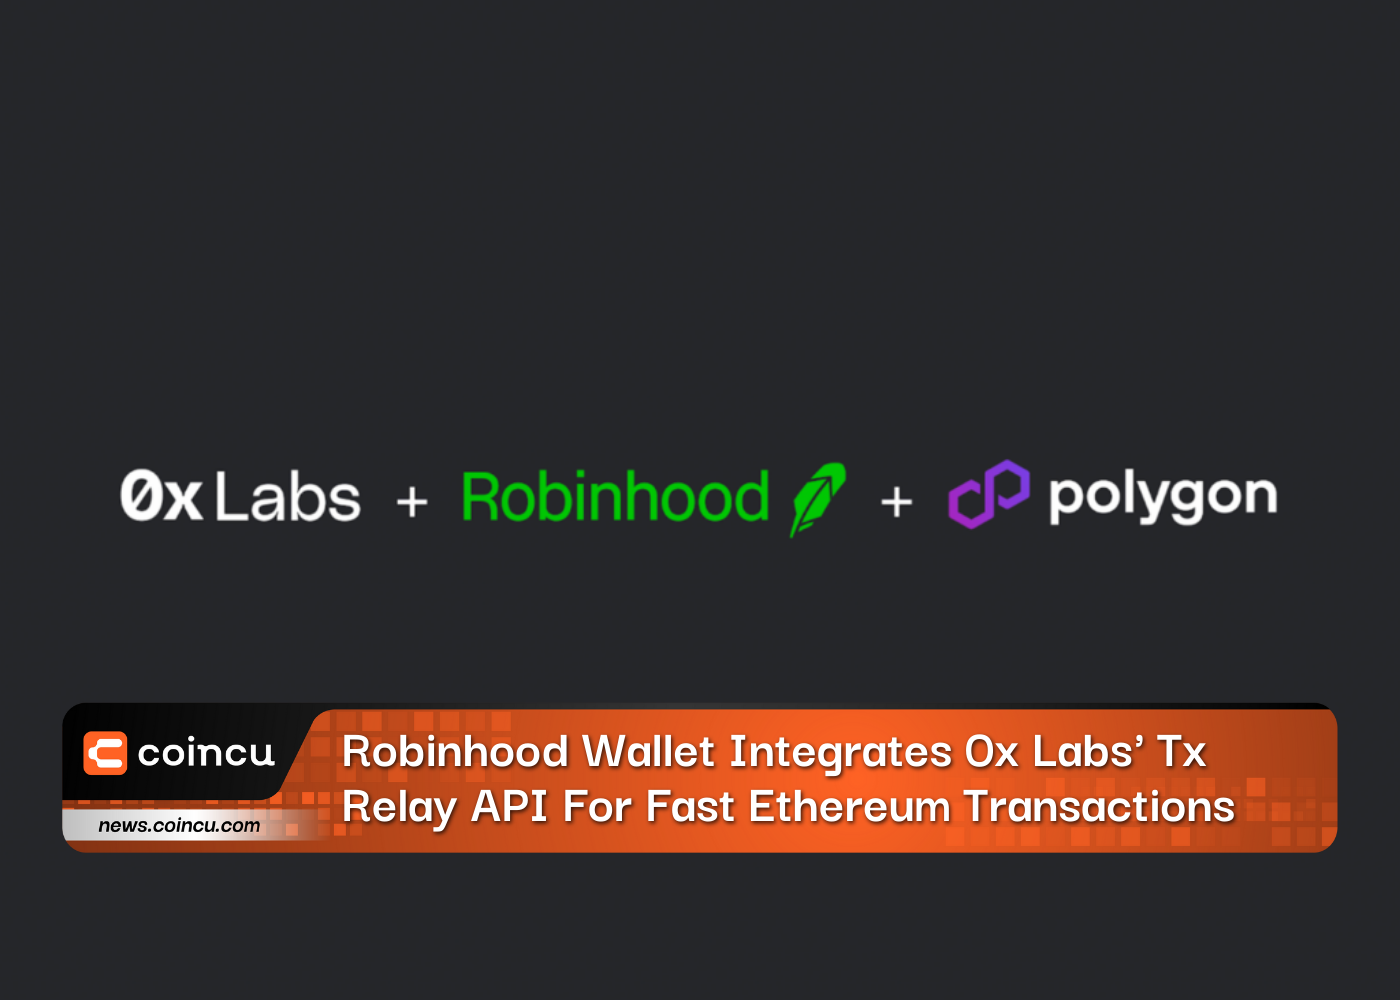 Robinhood Wallet Integrates 0x Labs' Tx Relay API For Fast Ethereum Transactions